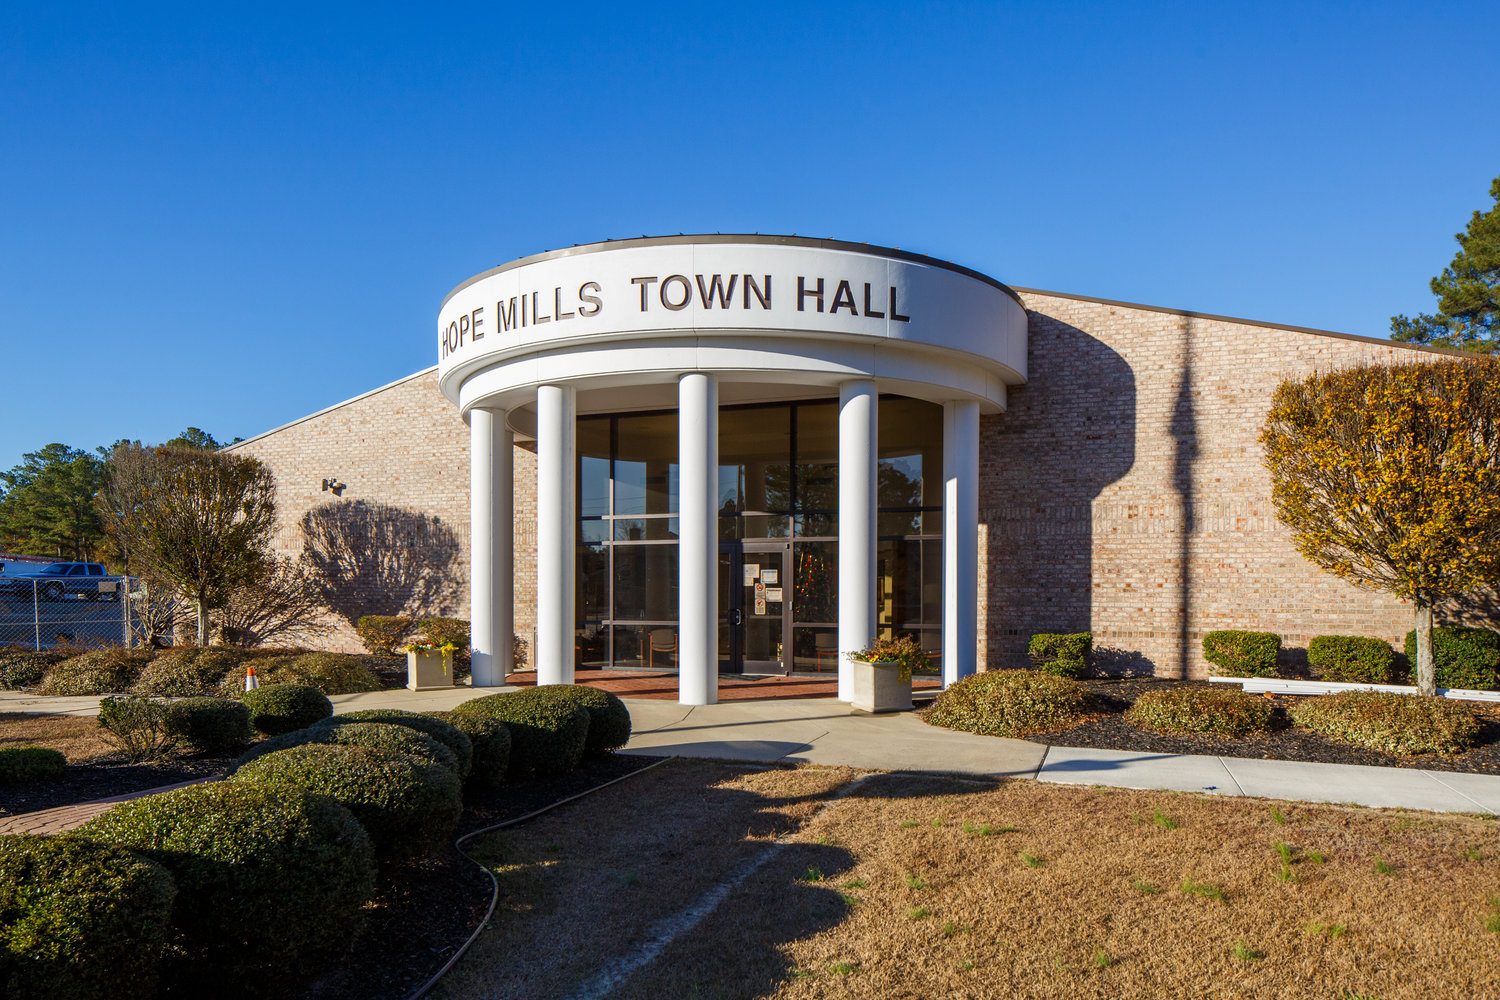 The Hope Mills Police Department has moved into the new Public Safety building, and the Fire Department should follow next week, the town Board of Commissioners was told Monday night.